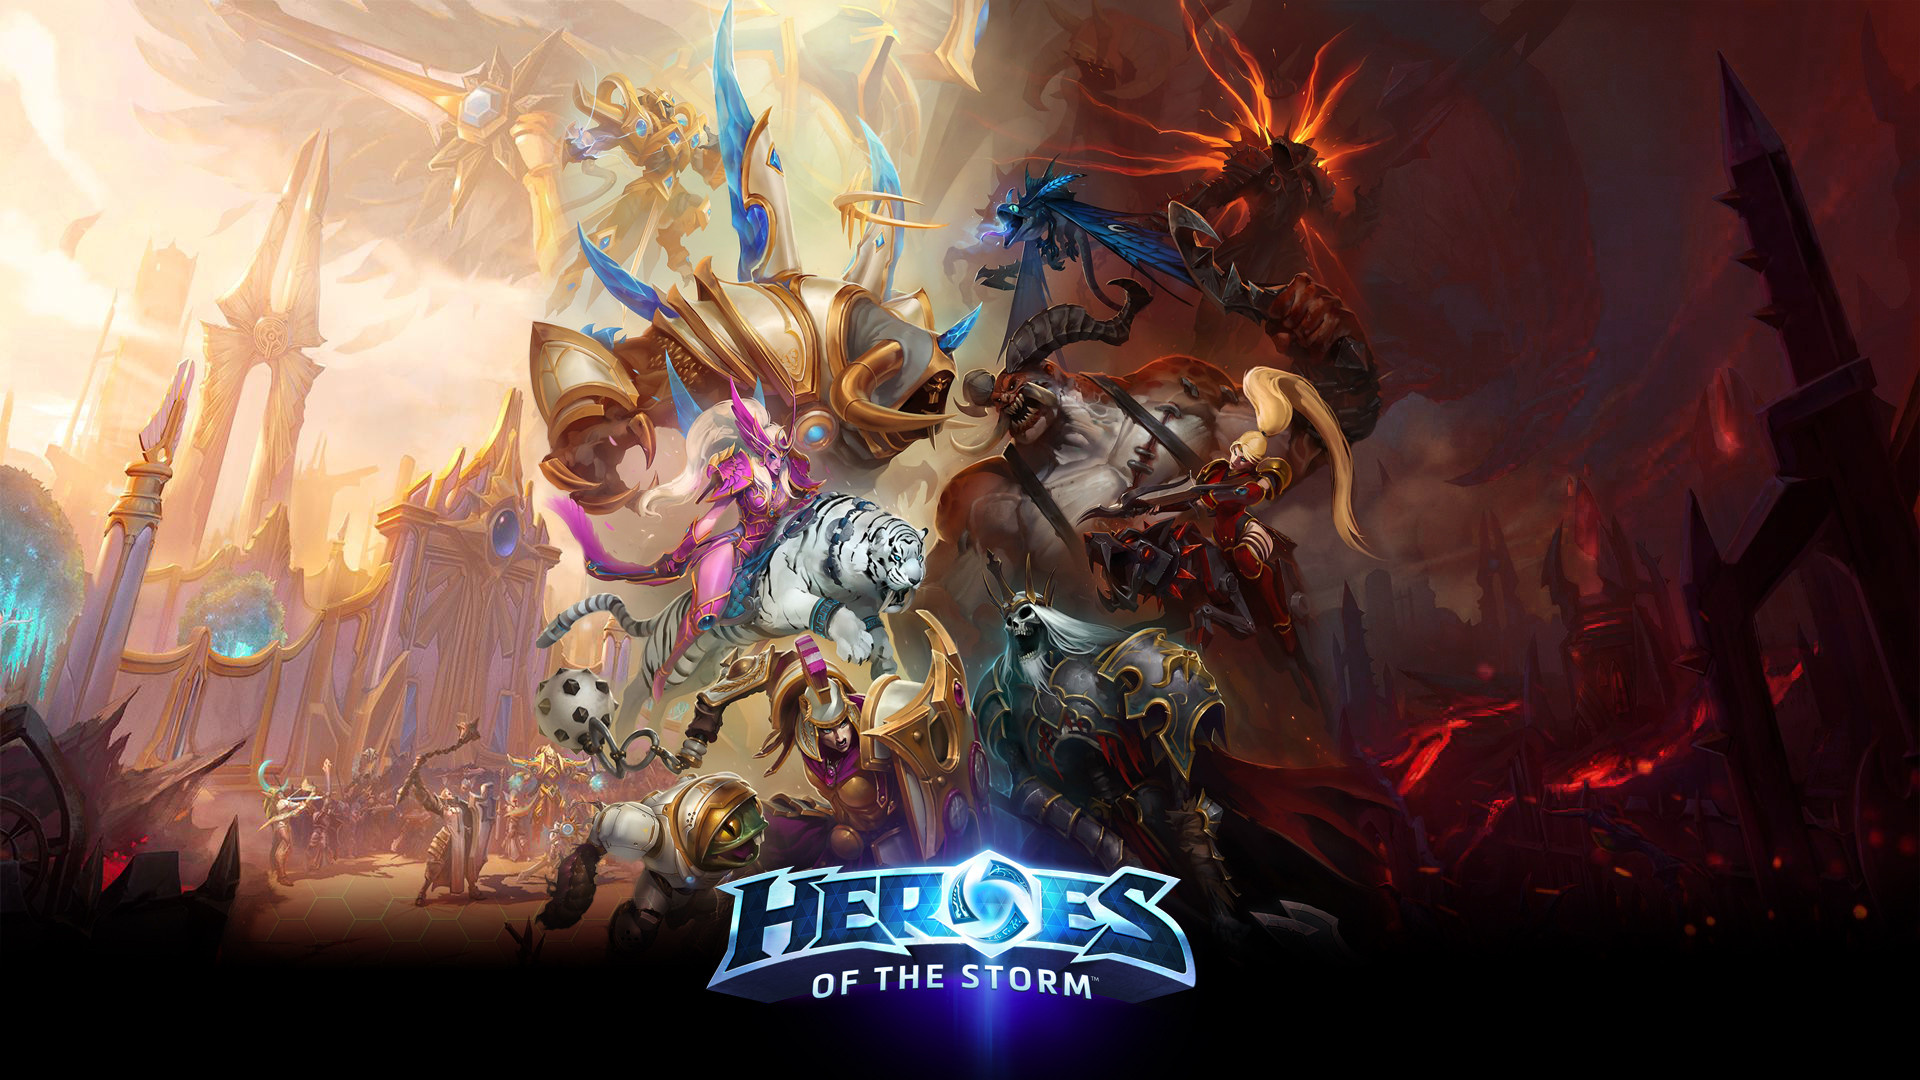 Heroes of the Storm, Gaming wallpaper, Epic battles, Exciting video game, 1920x1080 Full HD Desktop